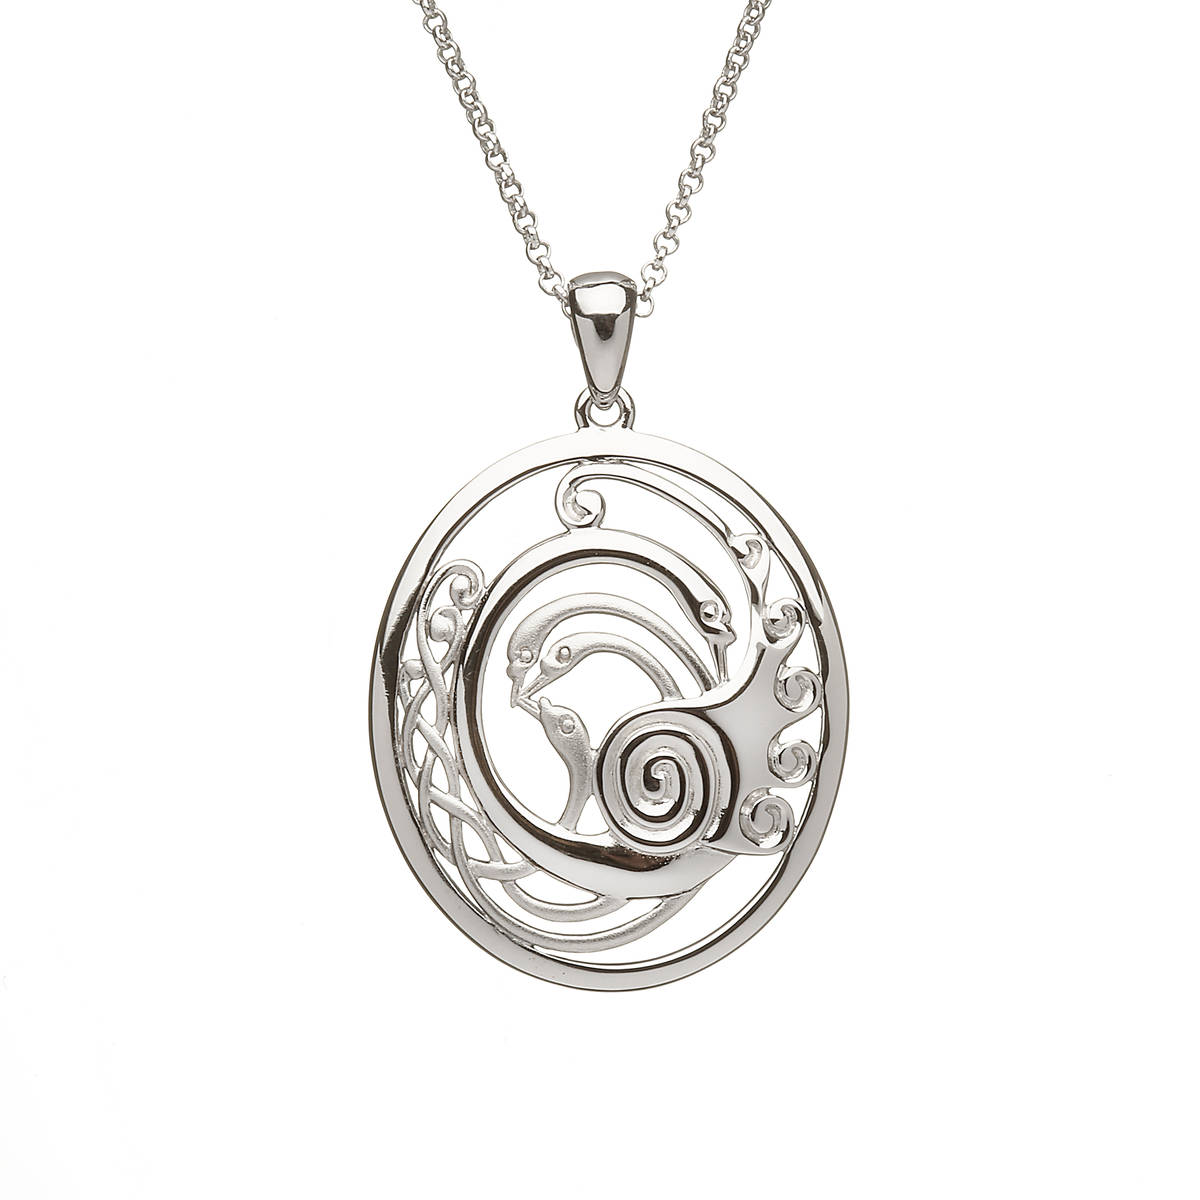 Sterling silver Children Of Lir pendant

Length: 16 inches